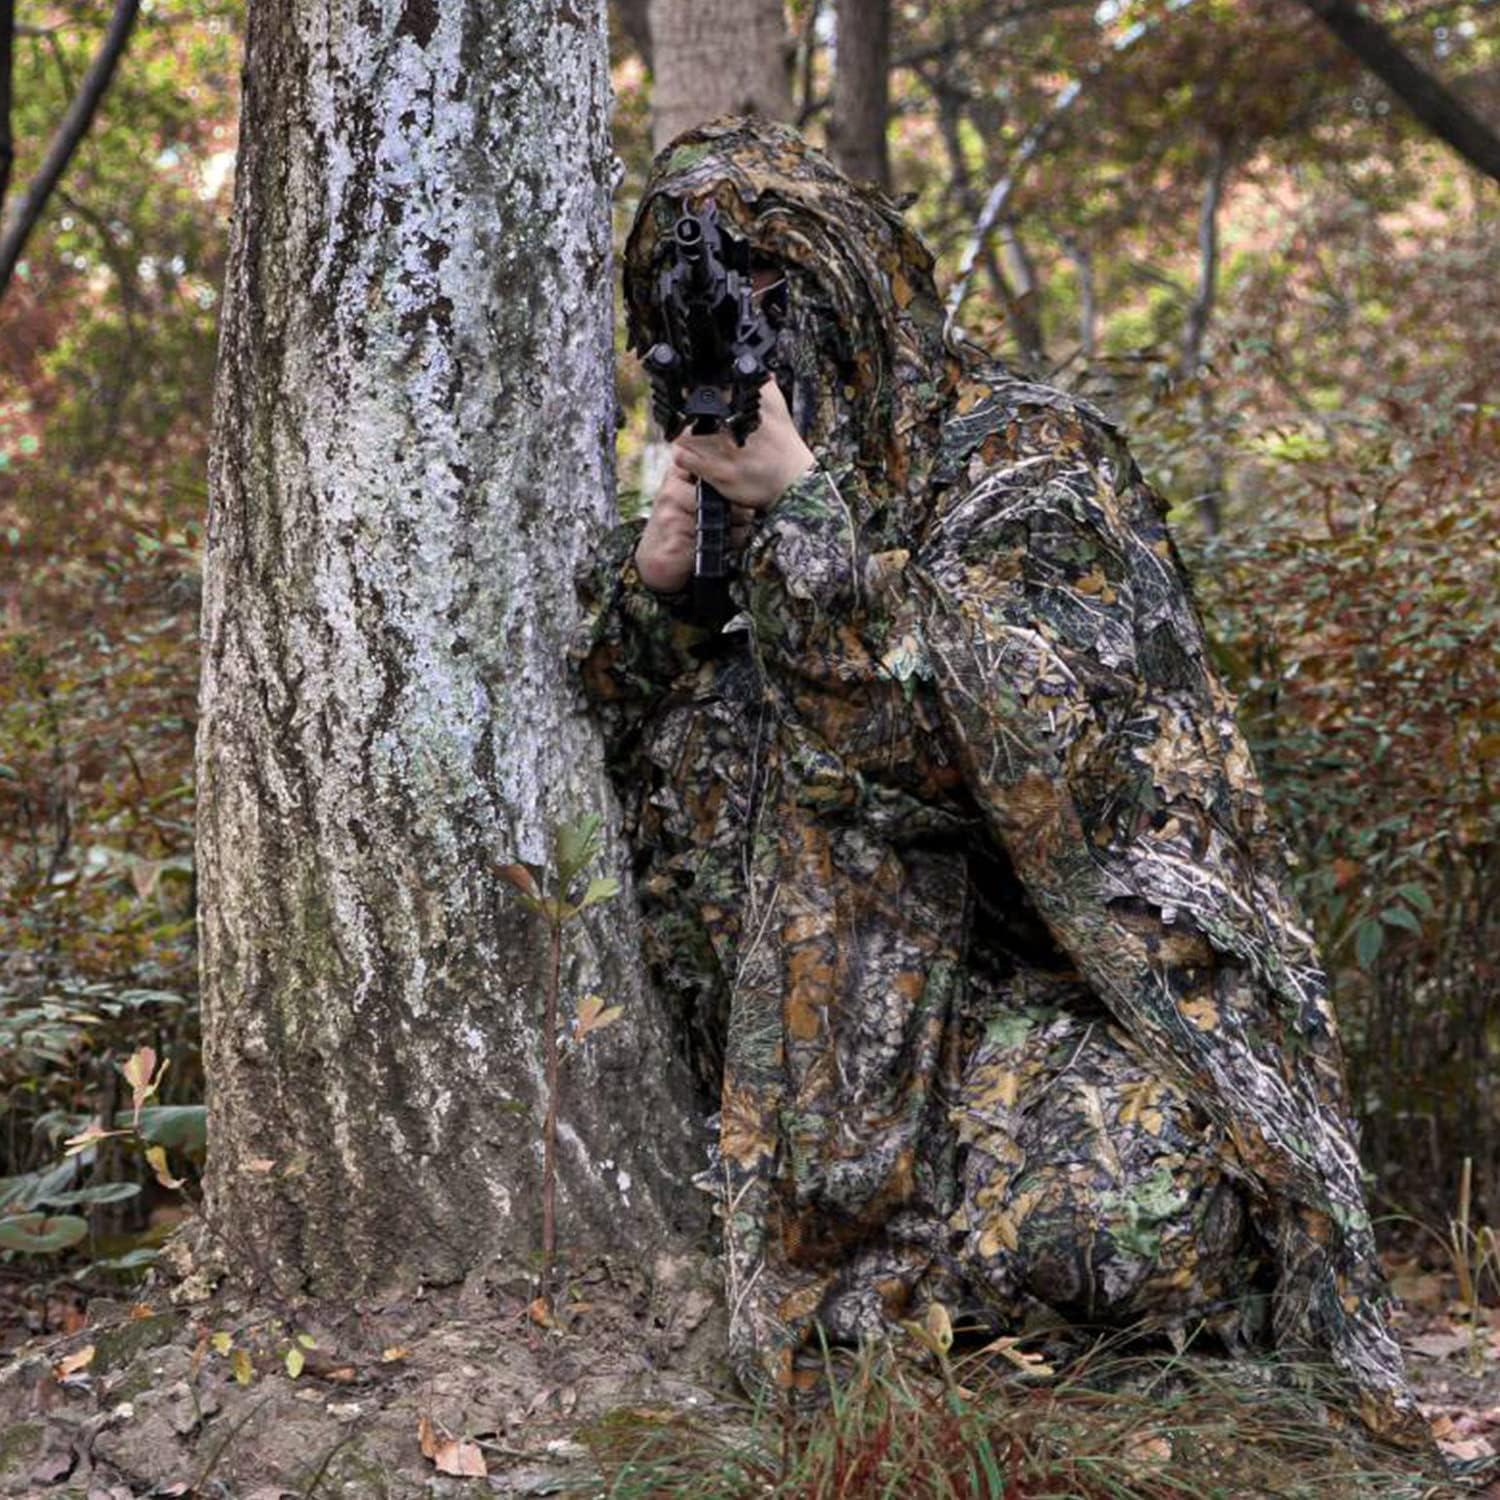 Ghillie Suit 3D Leafy Camo Suit Youth Adult Lightweight Hunting Camouflage  Suits Turkey Camo Hunting Gear Camo Clothing Hooded Apparel Gilly Suit for  Hunting Shooting Airsoft Wildlife Photography L for 5.9-6.3 Ft